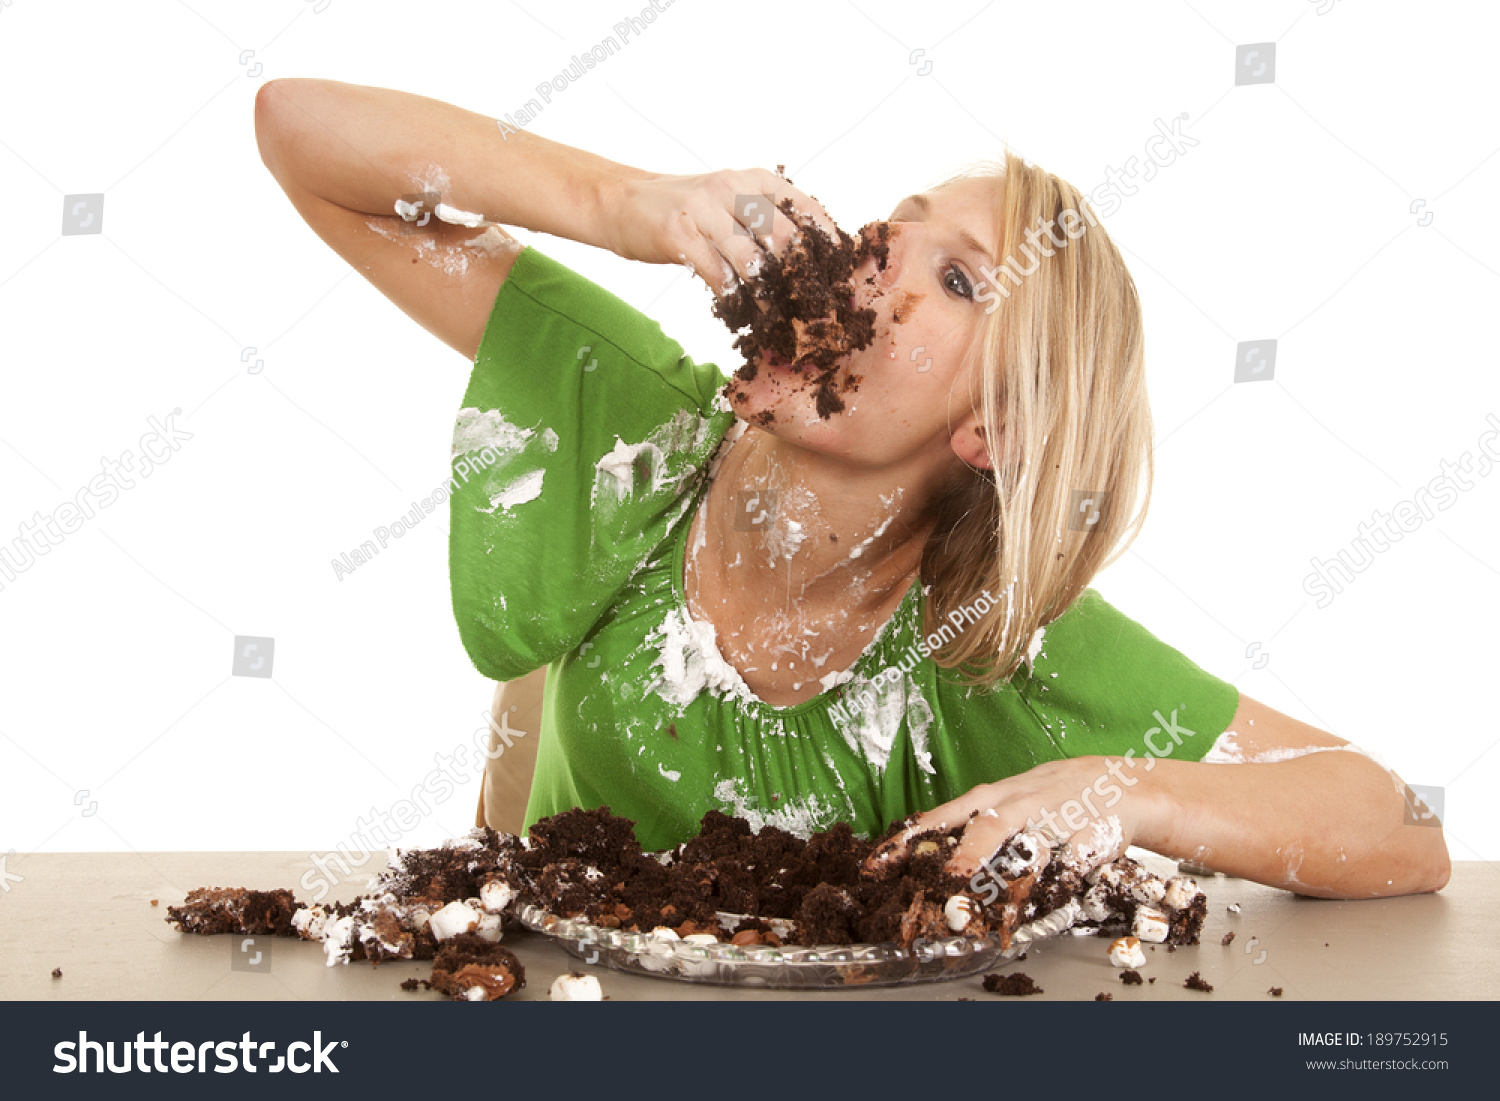 Girl Eating Birthday Cake With Icing On Her Face Stock ...